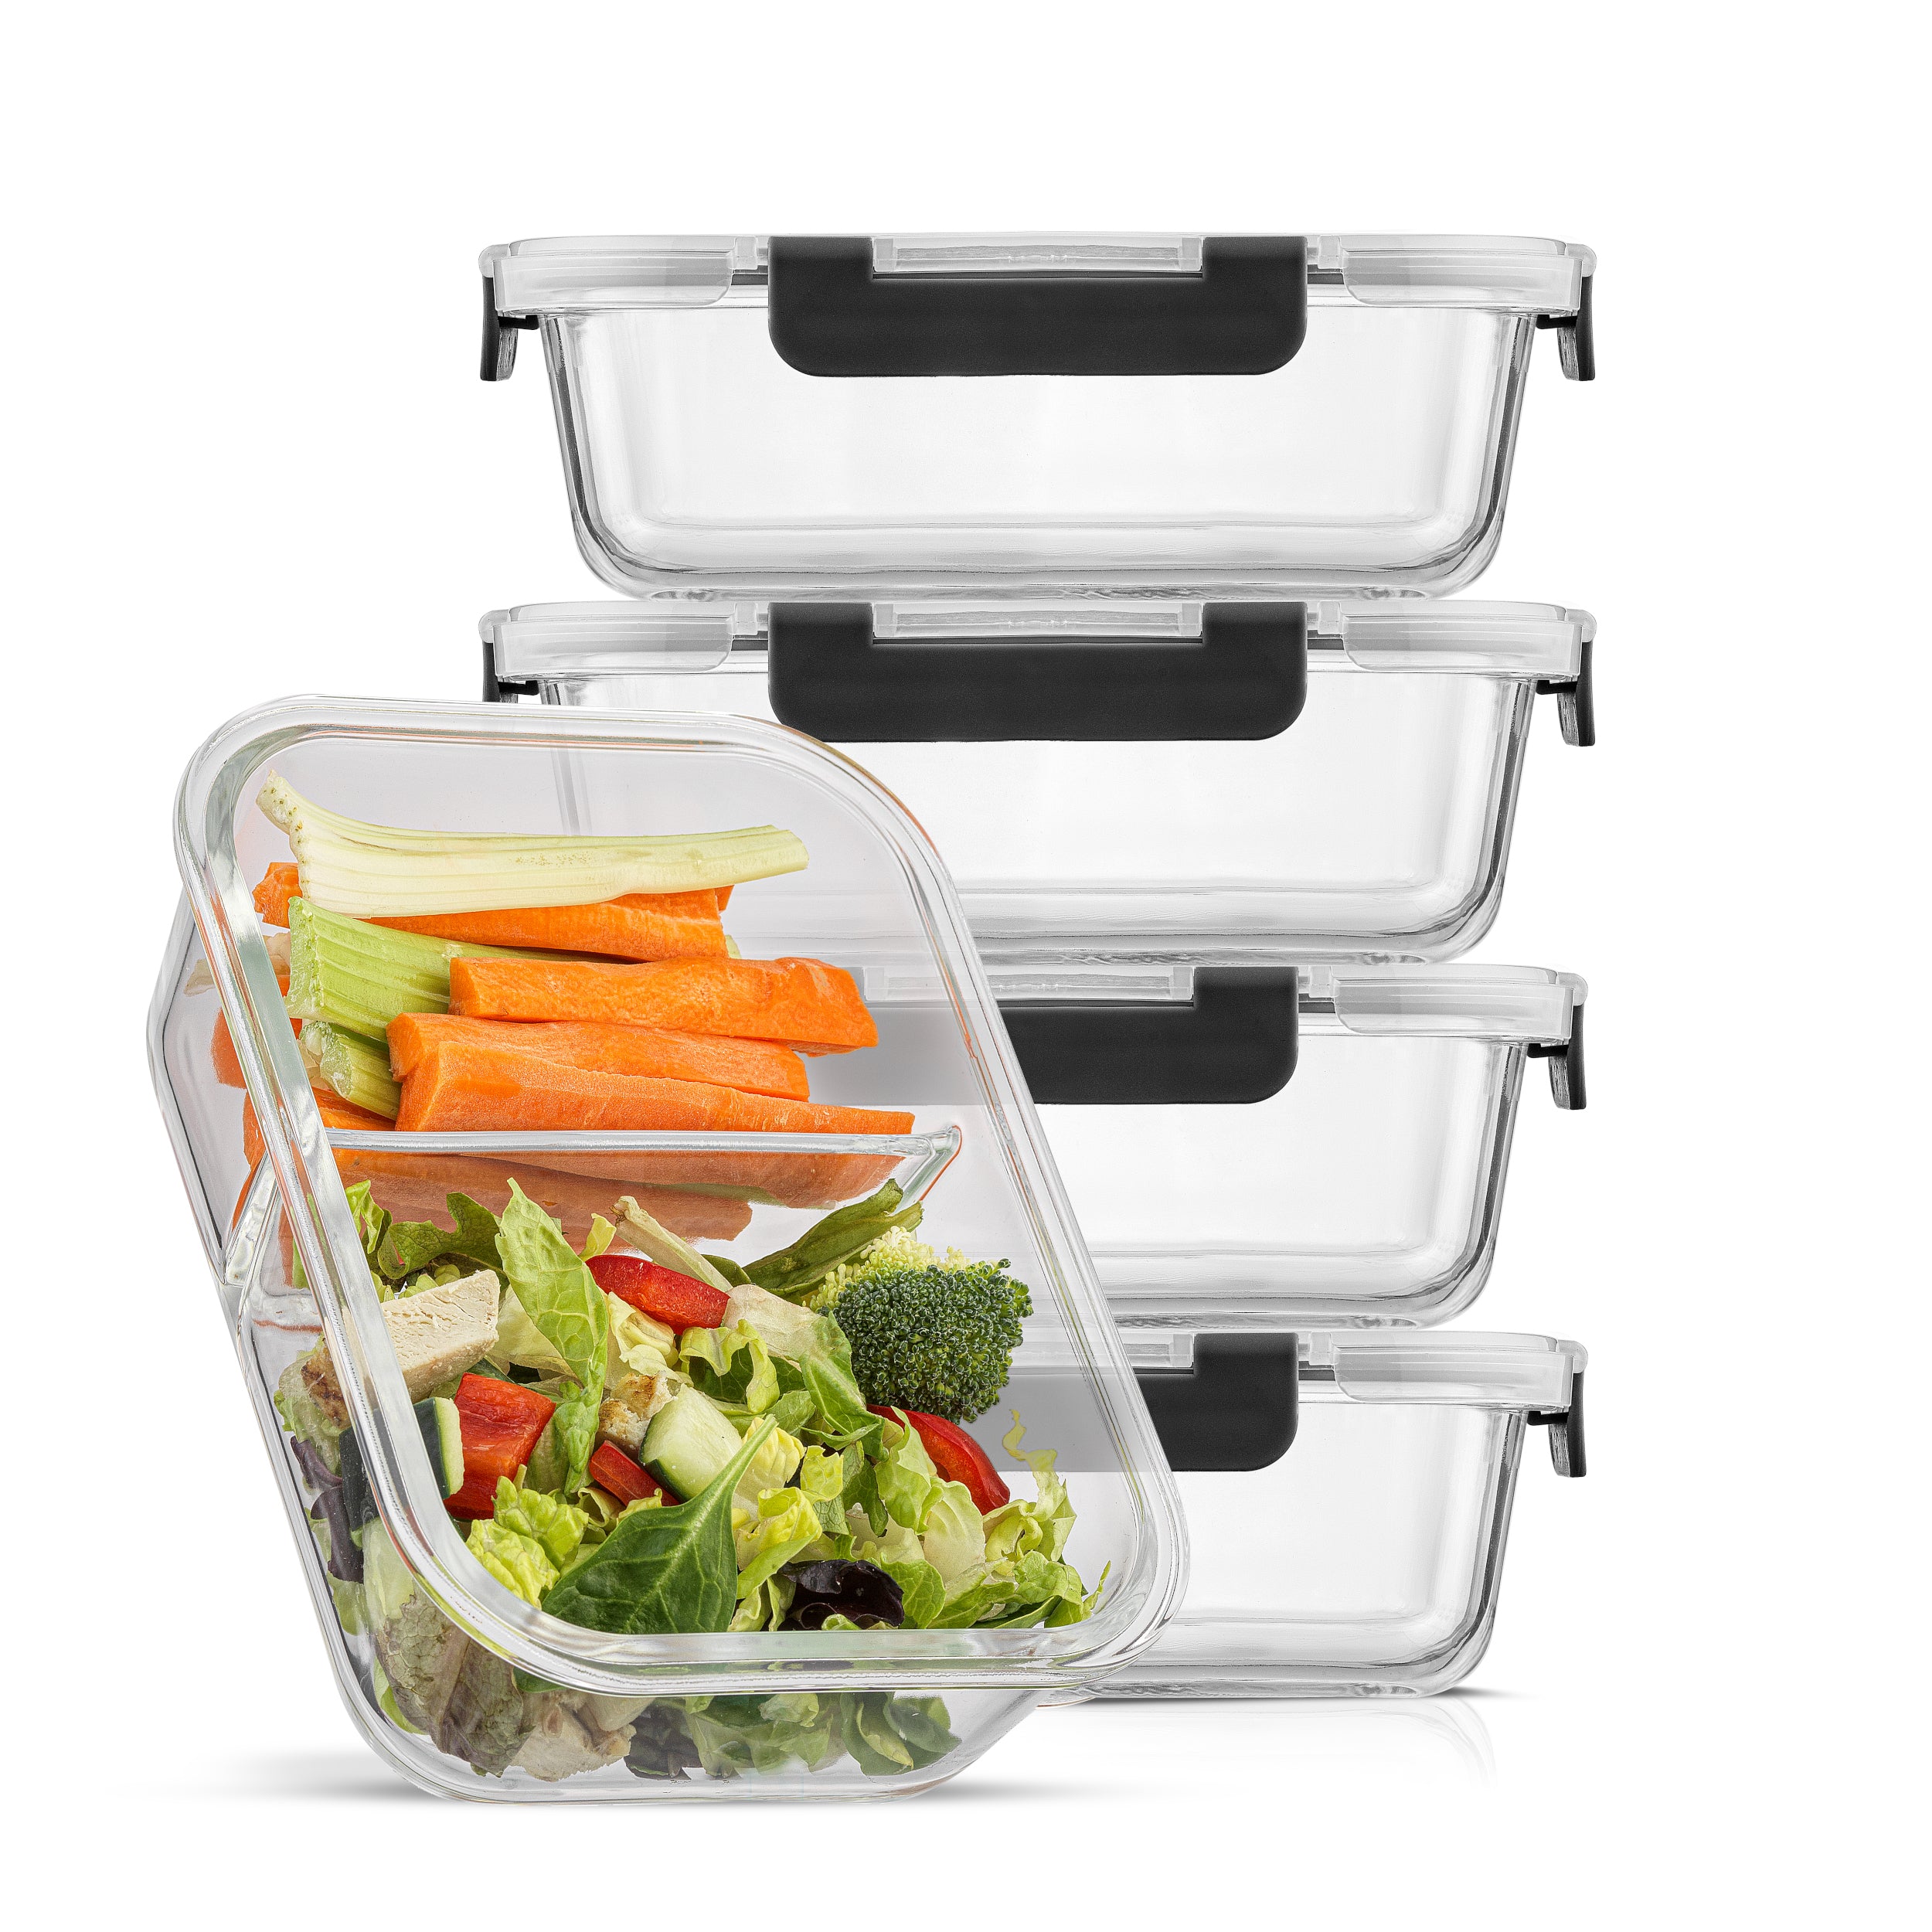 JoyJolt 2-Sectional Meal Prep Food Storage Containers